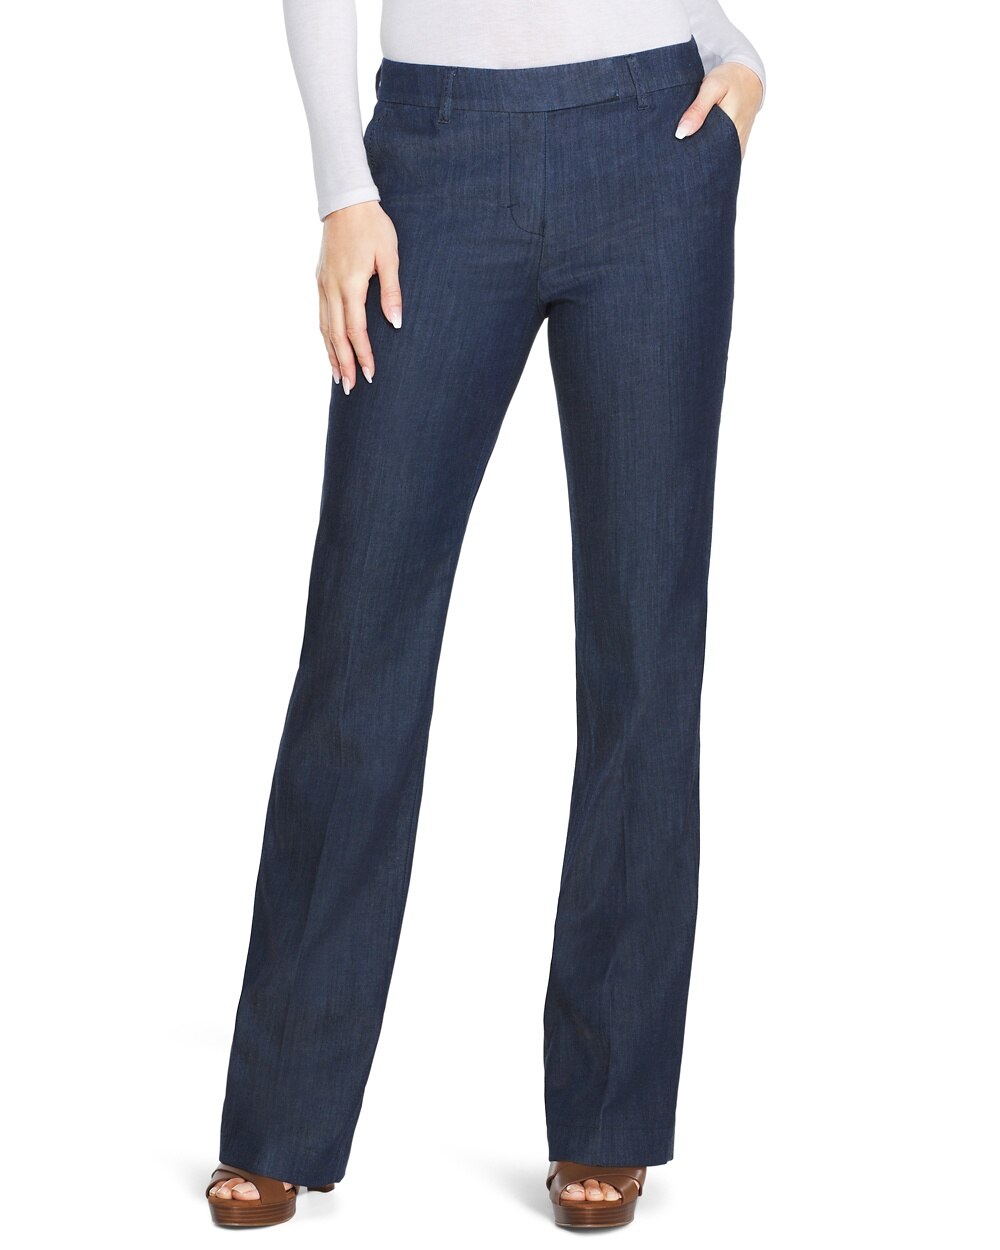 Curvy Trouser Flare Jeans - WHBM